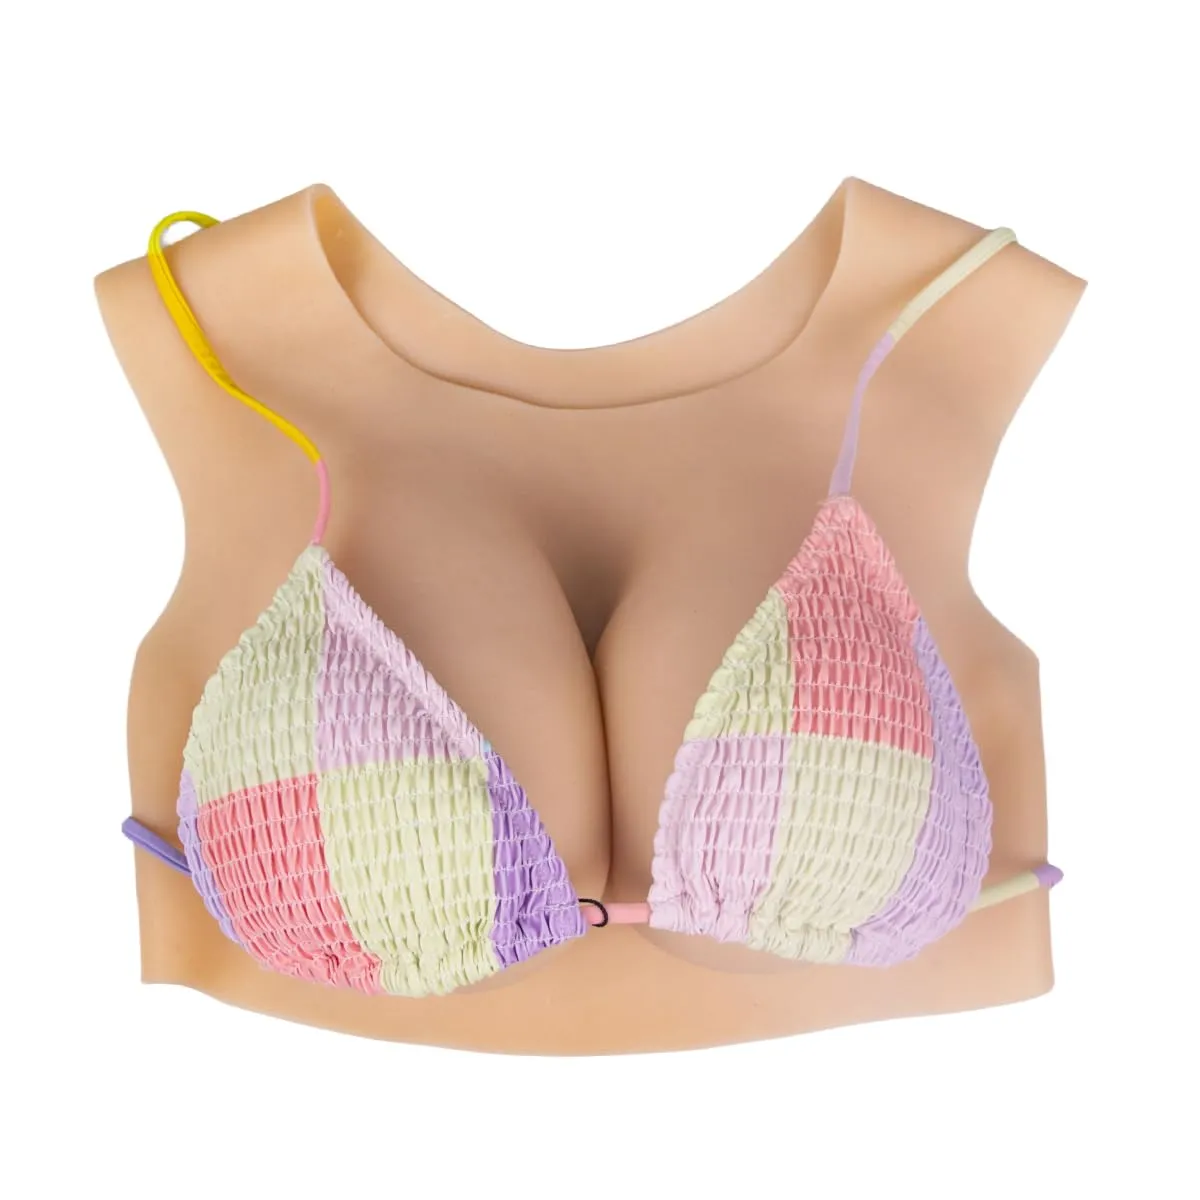 Buy Cotton Round Shaped Handcrafted Breast Prosthesis Medium